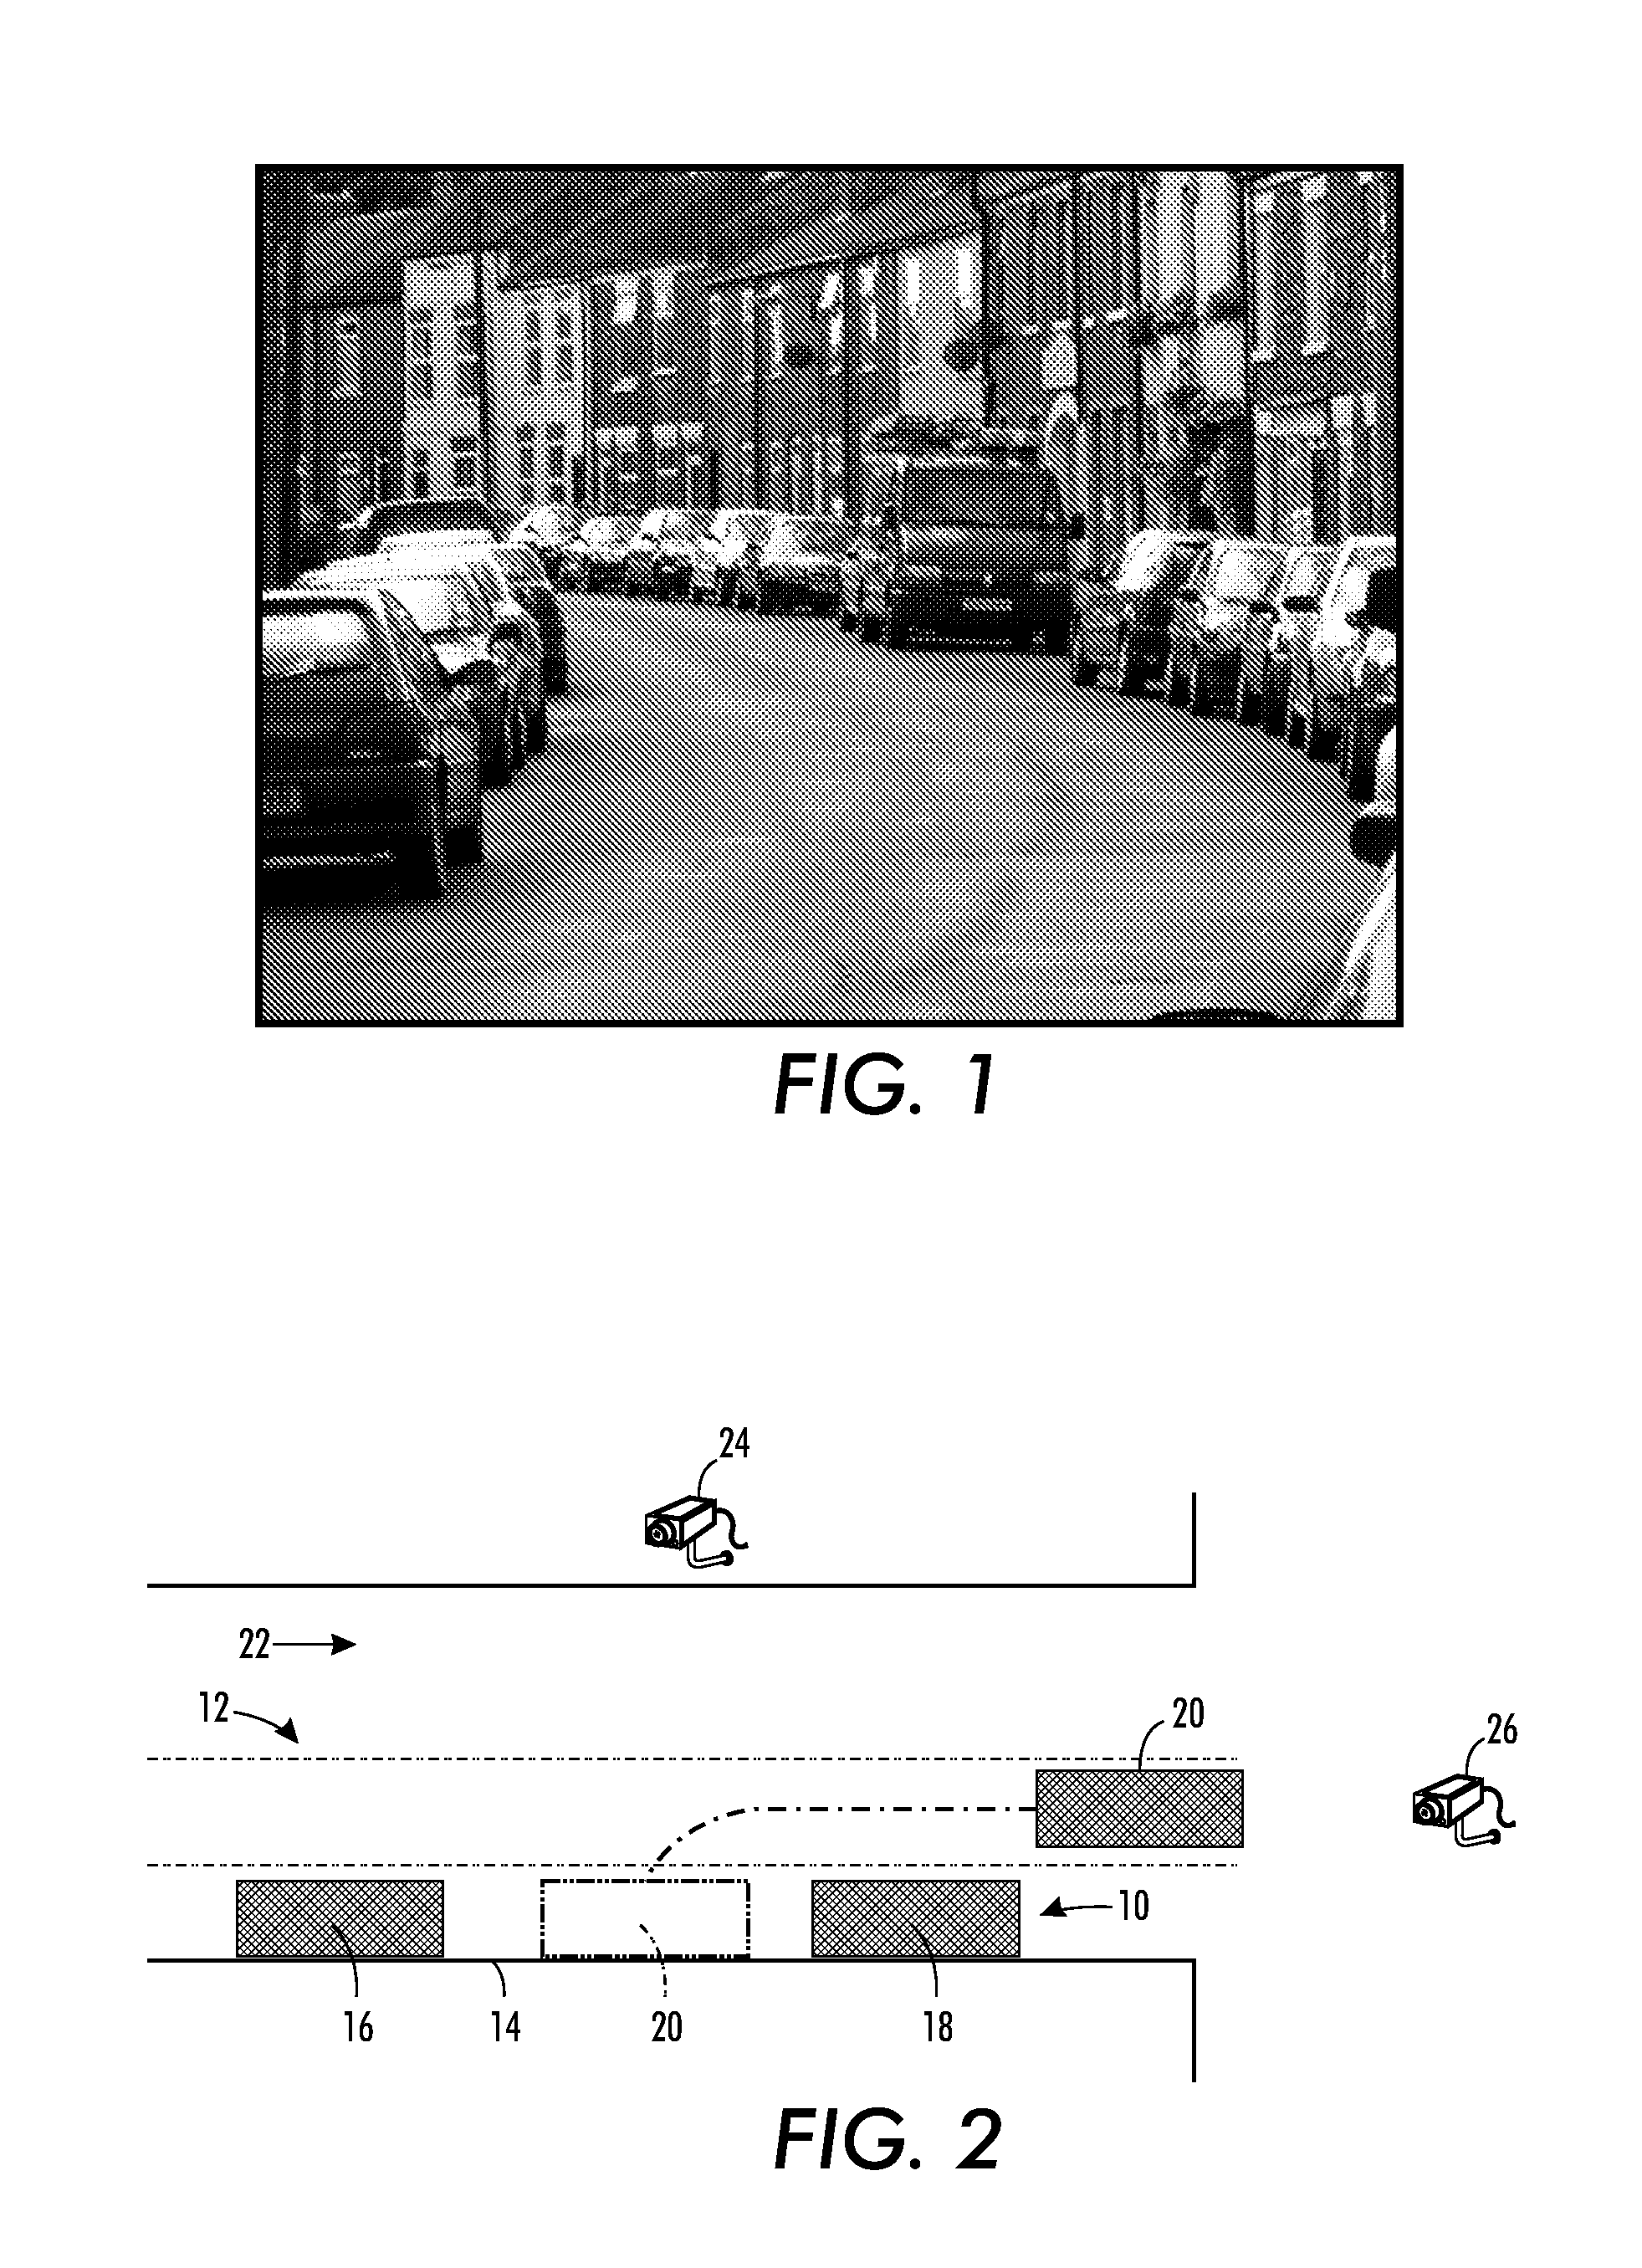 System and method for street-parking-vehicle identification through license plate capturing